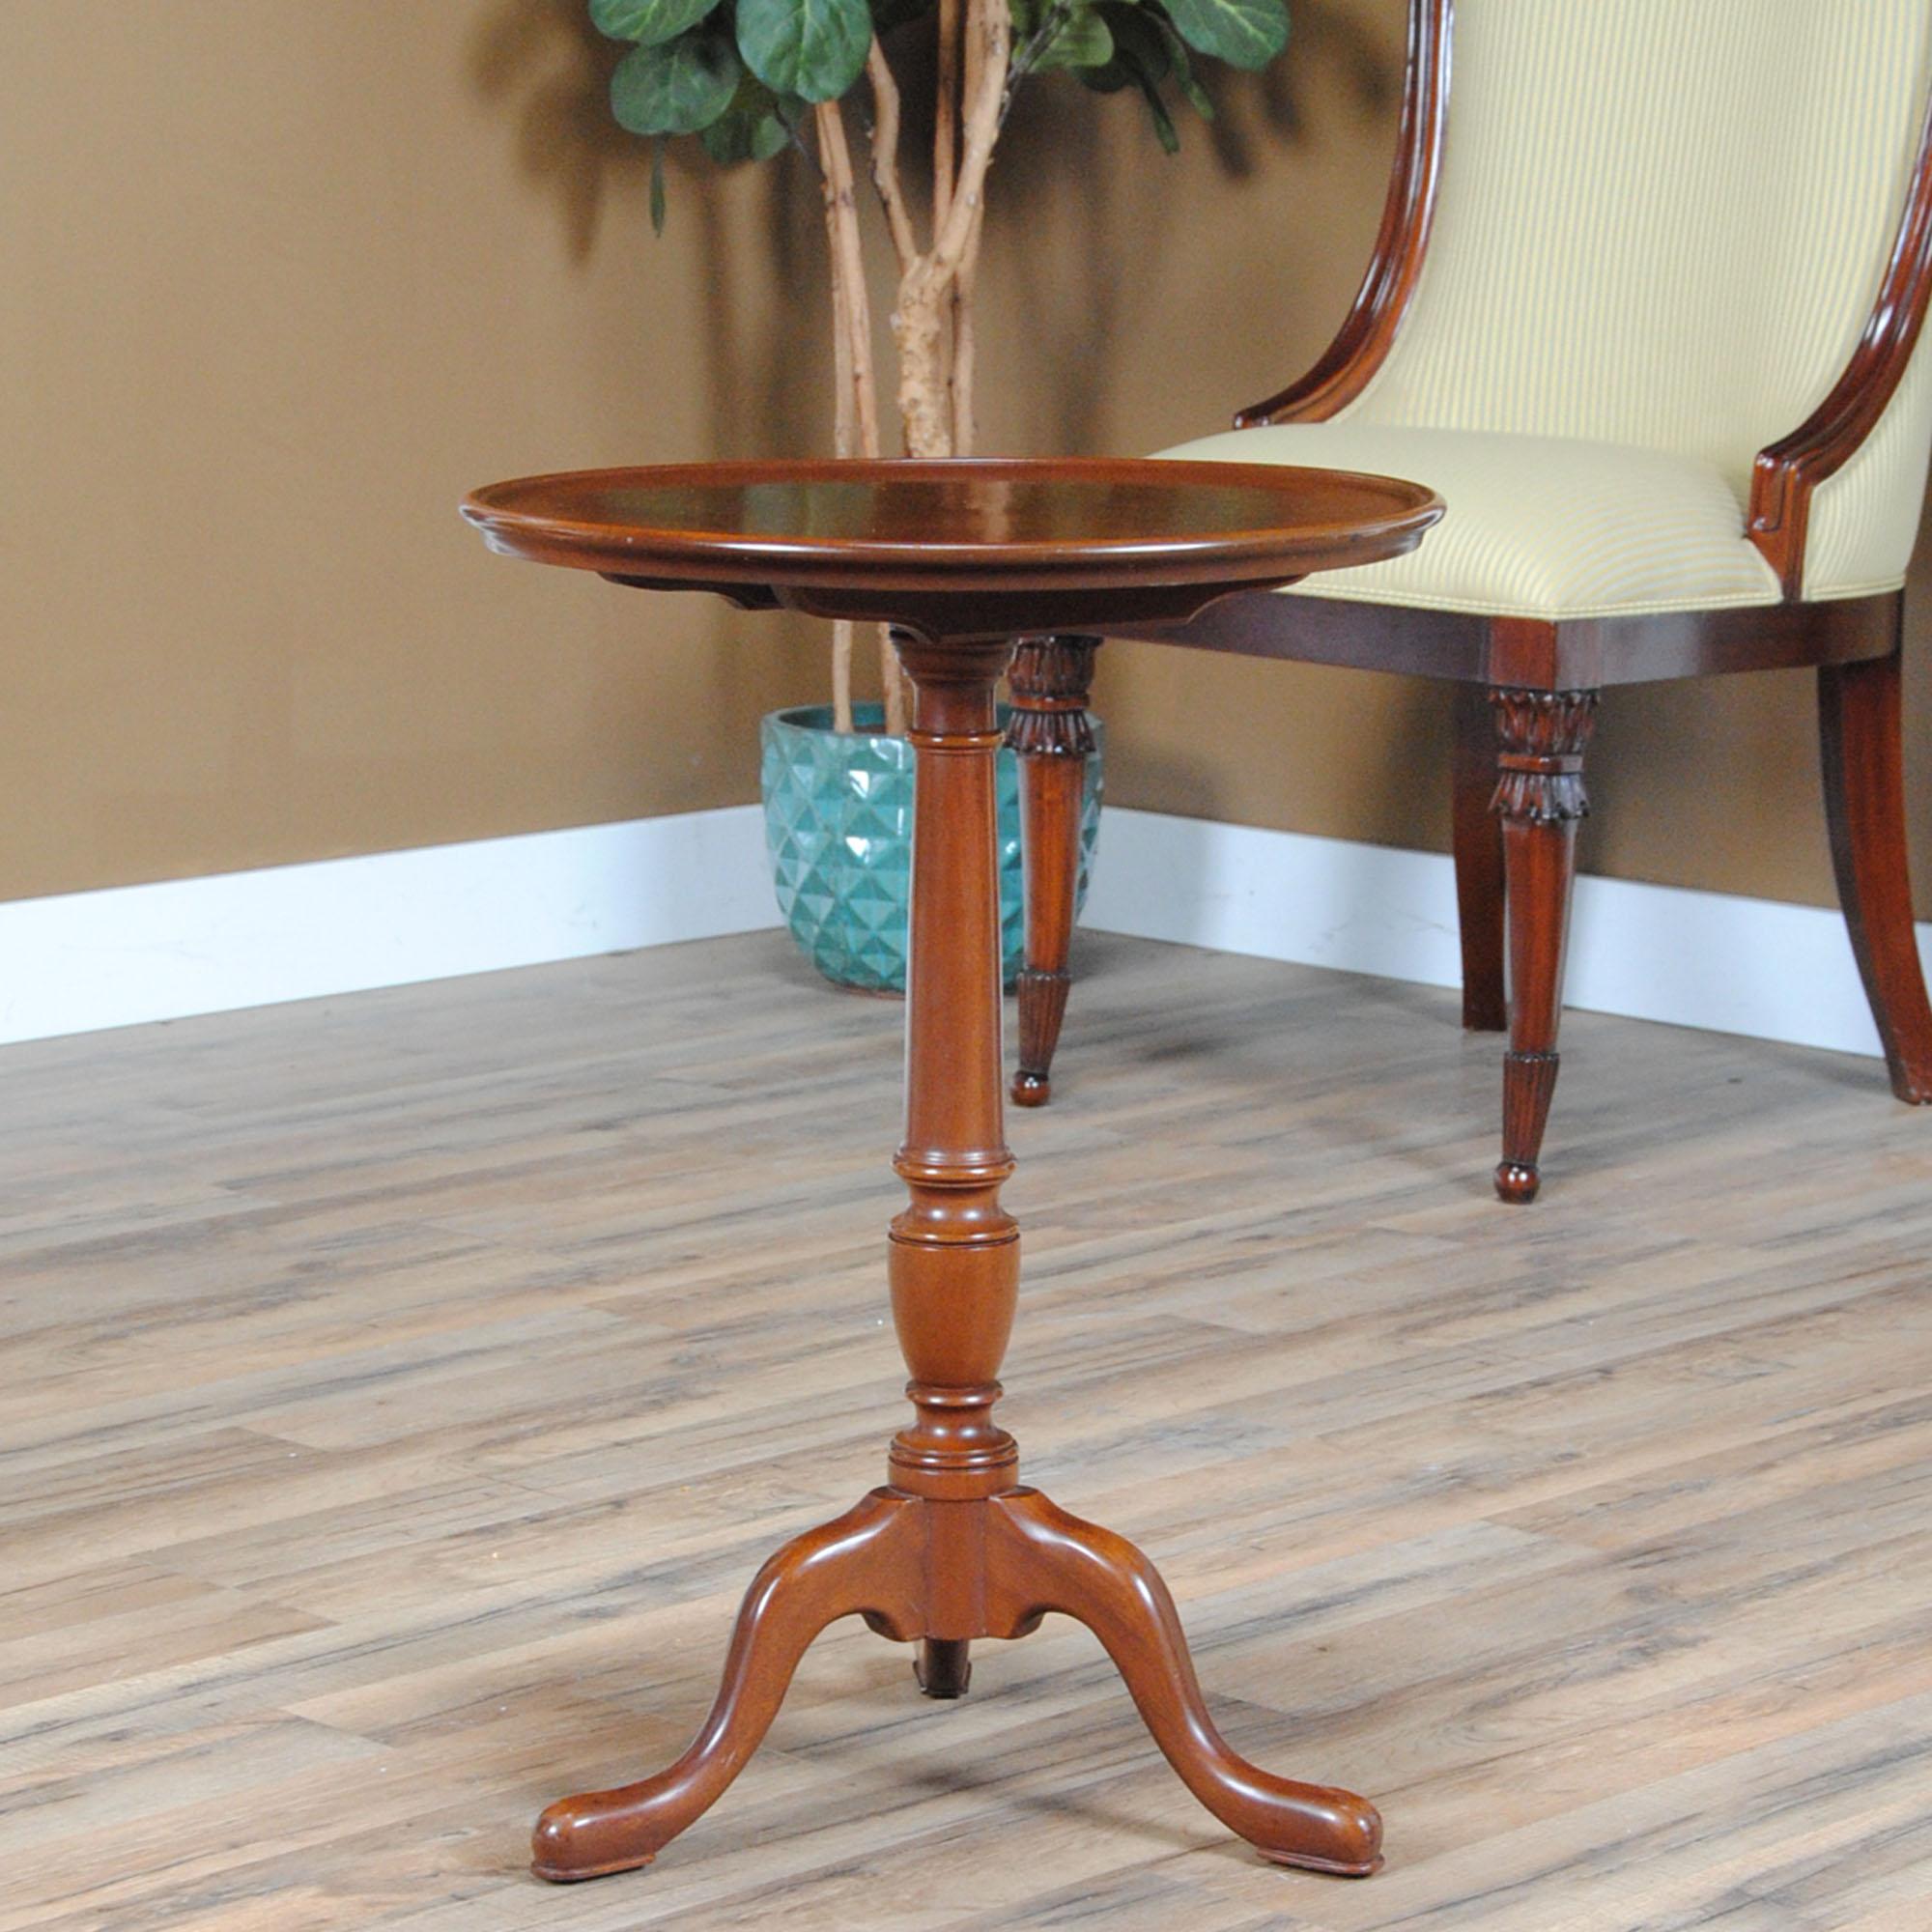 A Vintage Kittinger Table. While petite and elegant this faithful antique reproduction is also sturdy and strong. Great quality construction is the hall mark of the Vintage Kittinger Table and it includes a solId mahogany hand turned column, solid